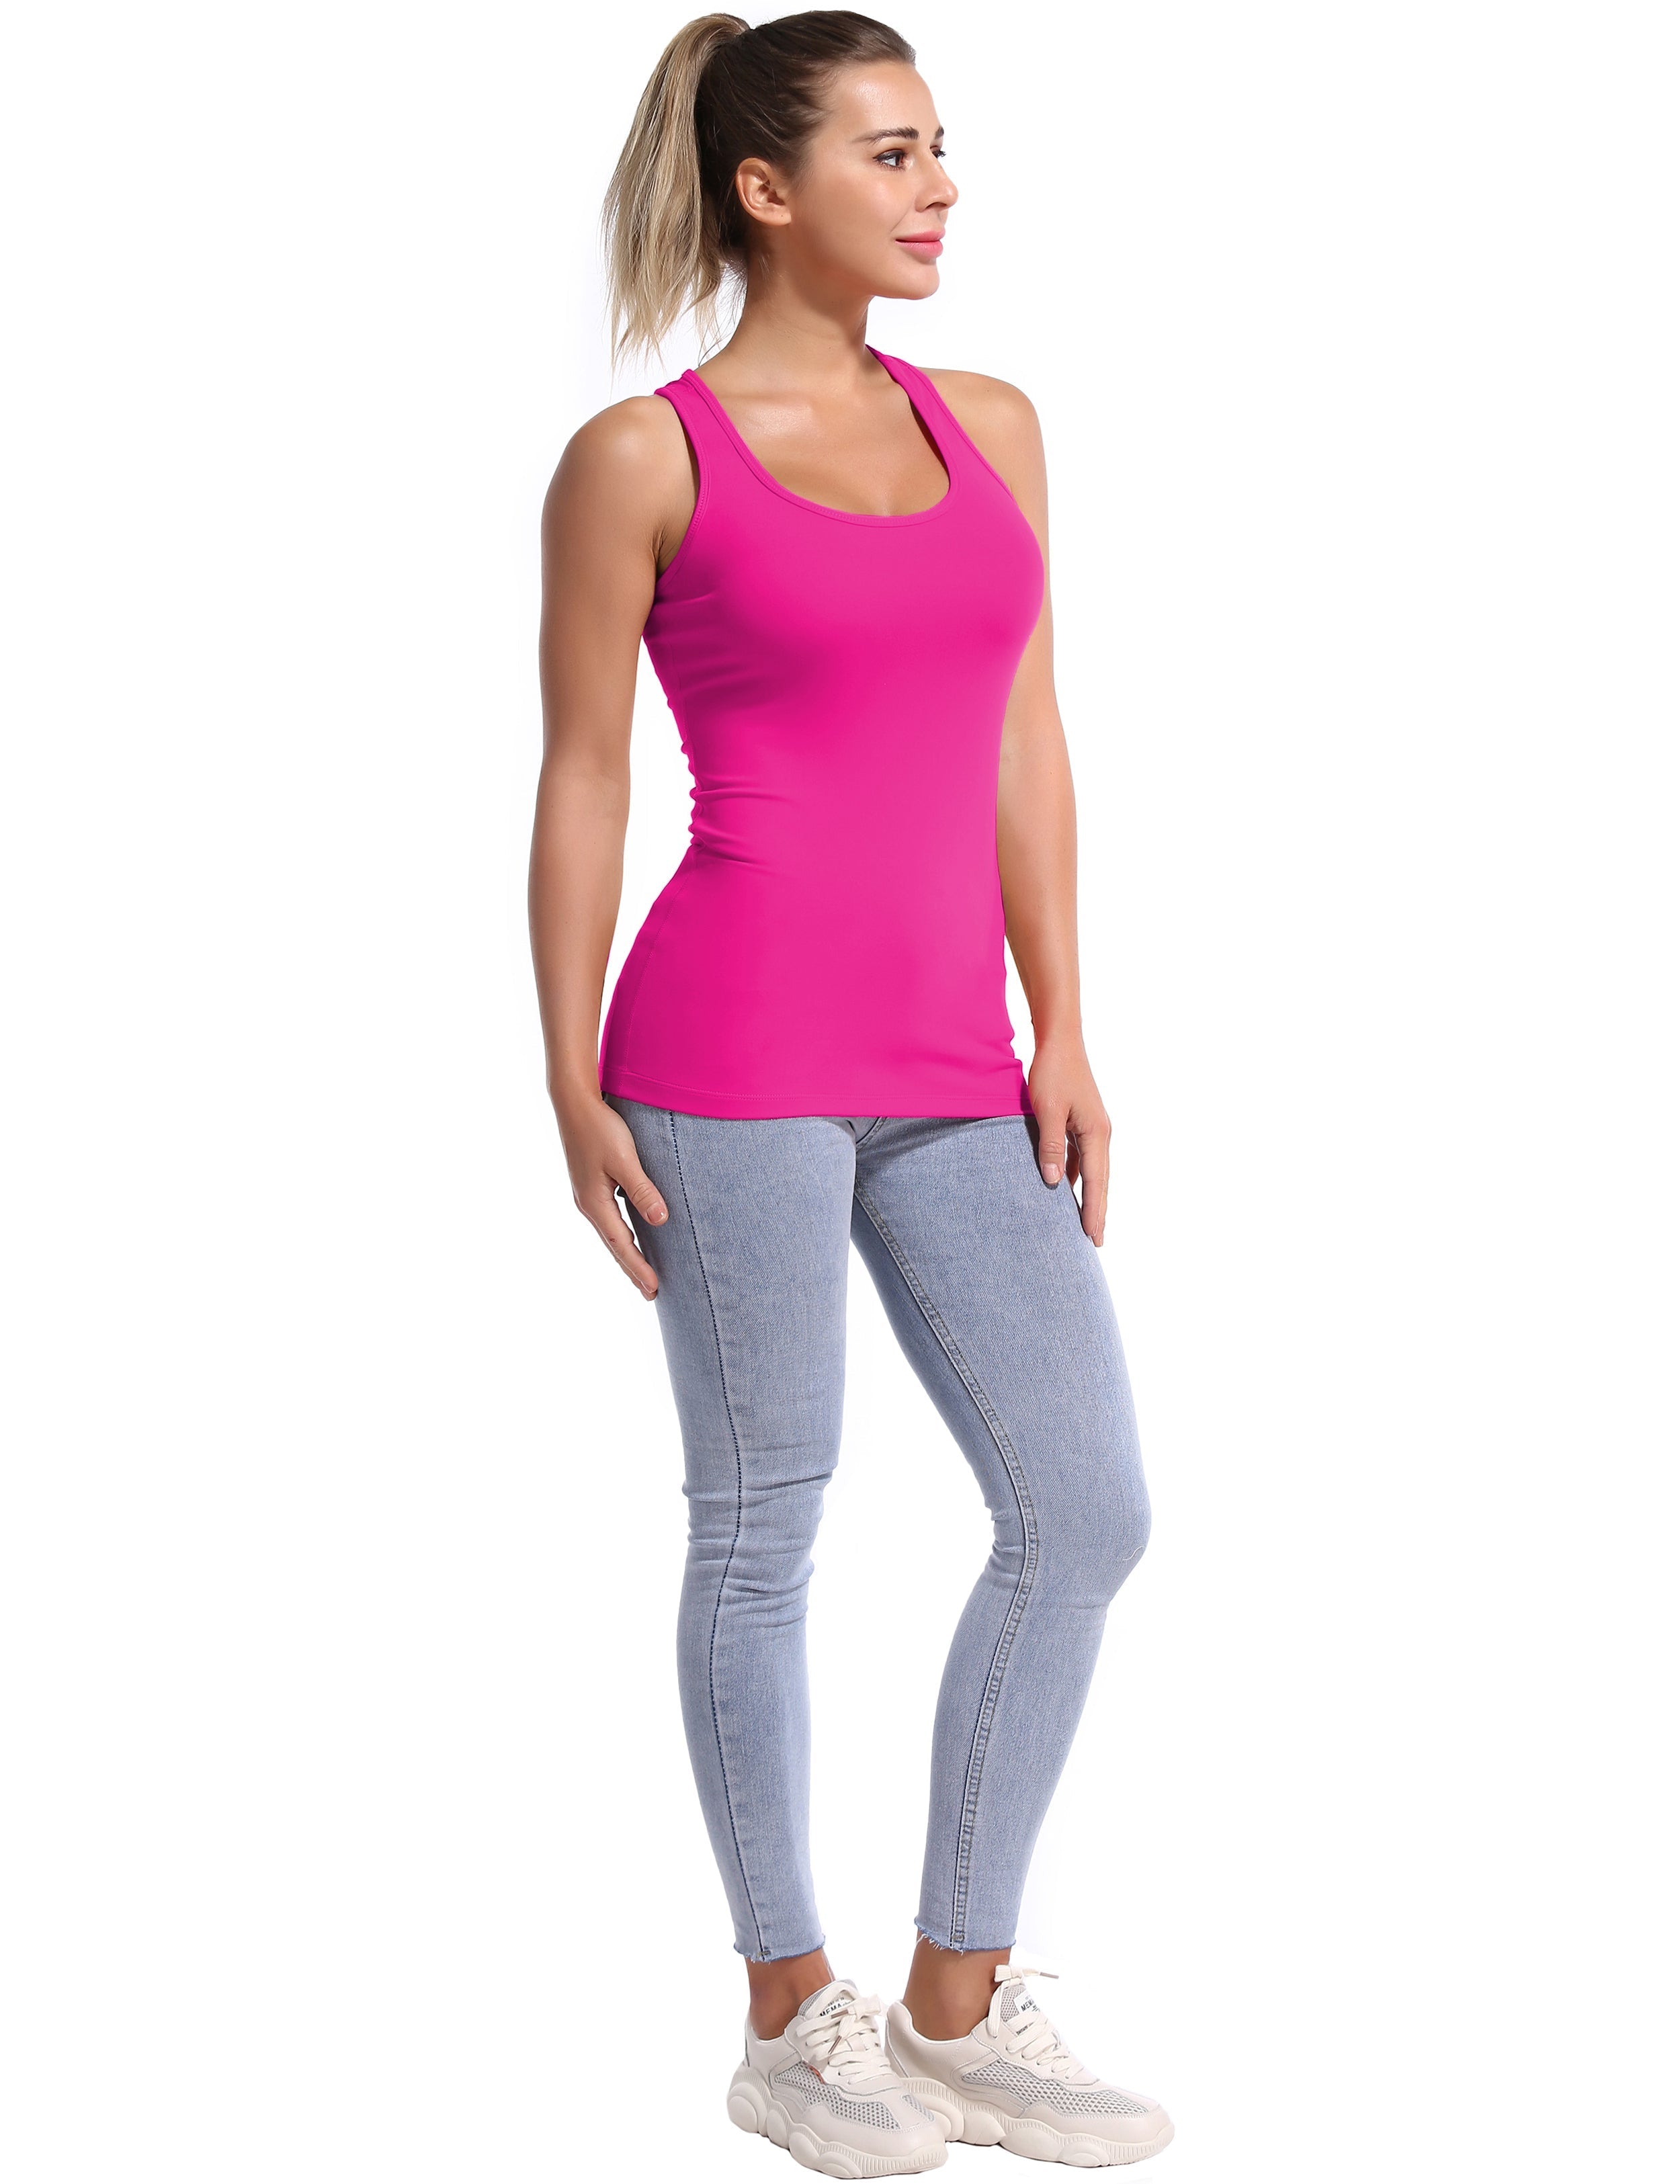 Racerback Athletic Tank Tops magenta 92%Nylon/8%Spandex(Cotton Soft) Designed for Tall Size Tight Fit So buttery soft, it feels weightless Sweat-wicking Four-way stretch Breathable Contours your body Sits below the waistband for moderate, everyday coverage